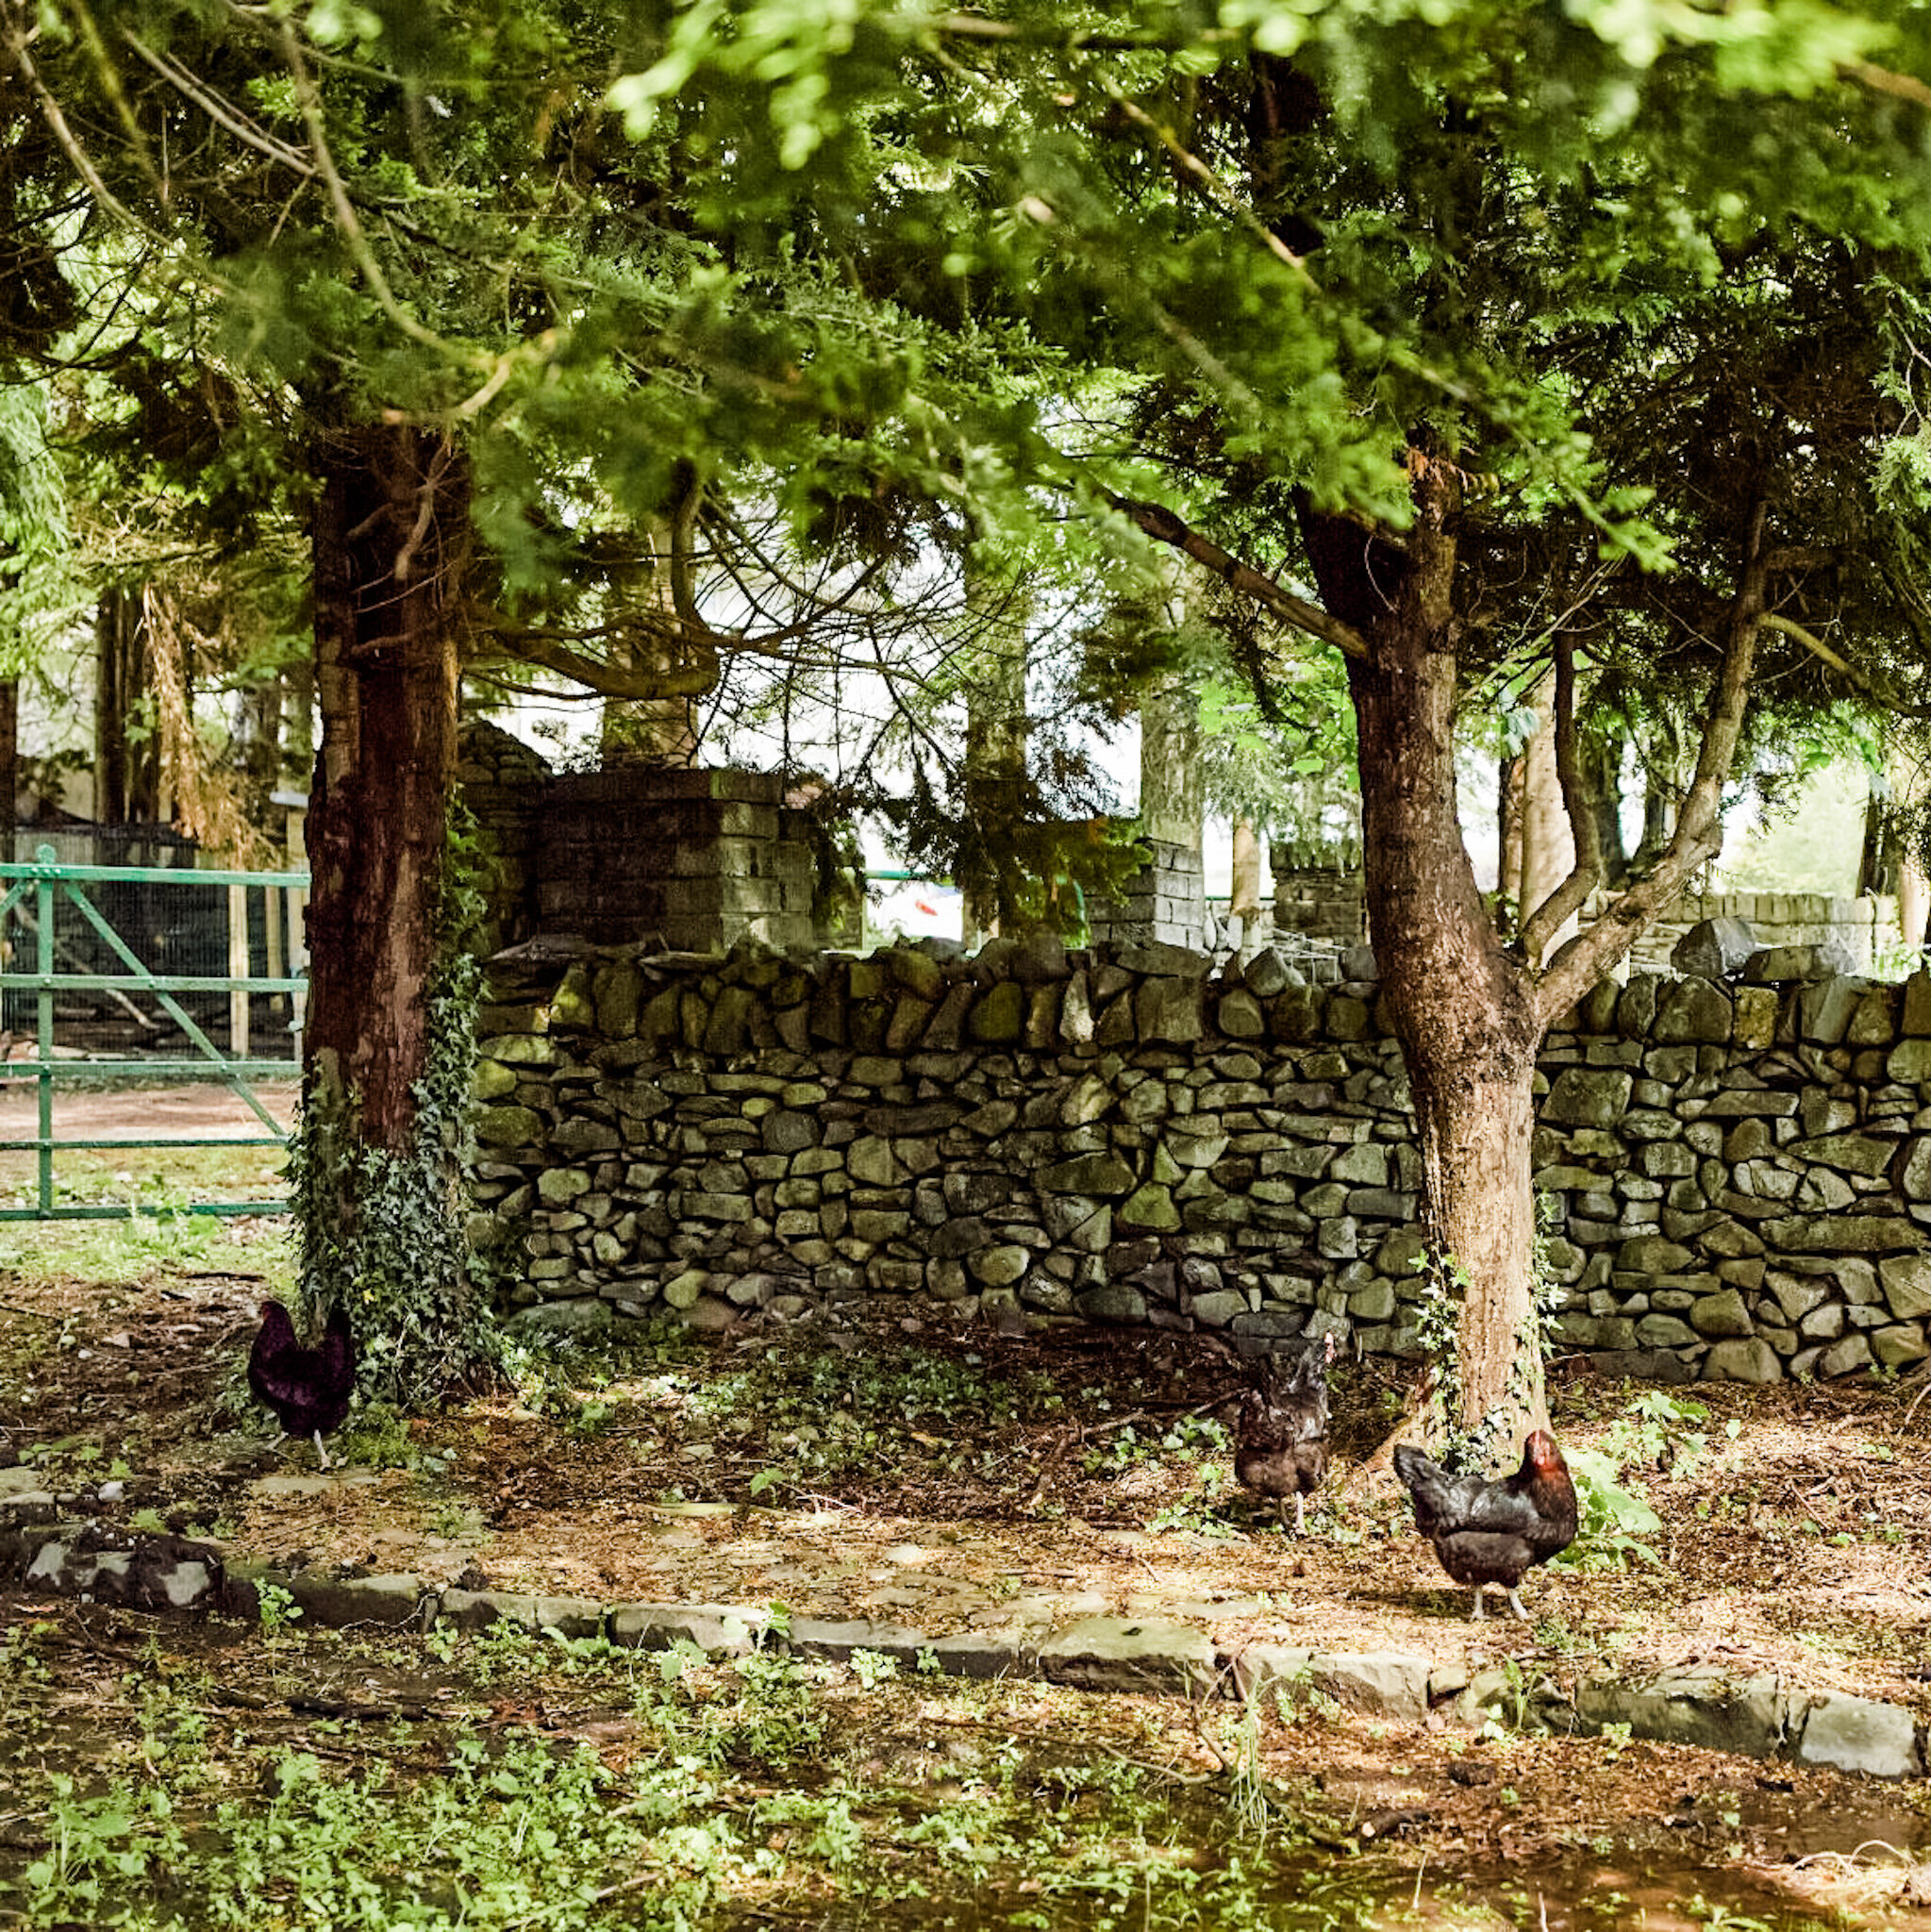 Chickens in orchard_G8A8709_SM 1.jpg